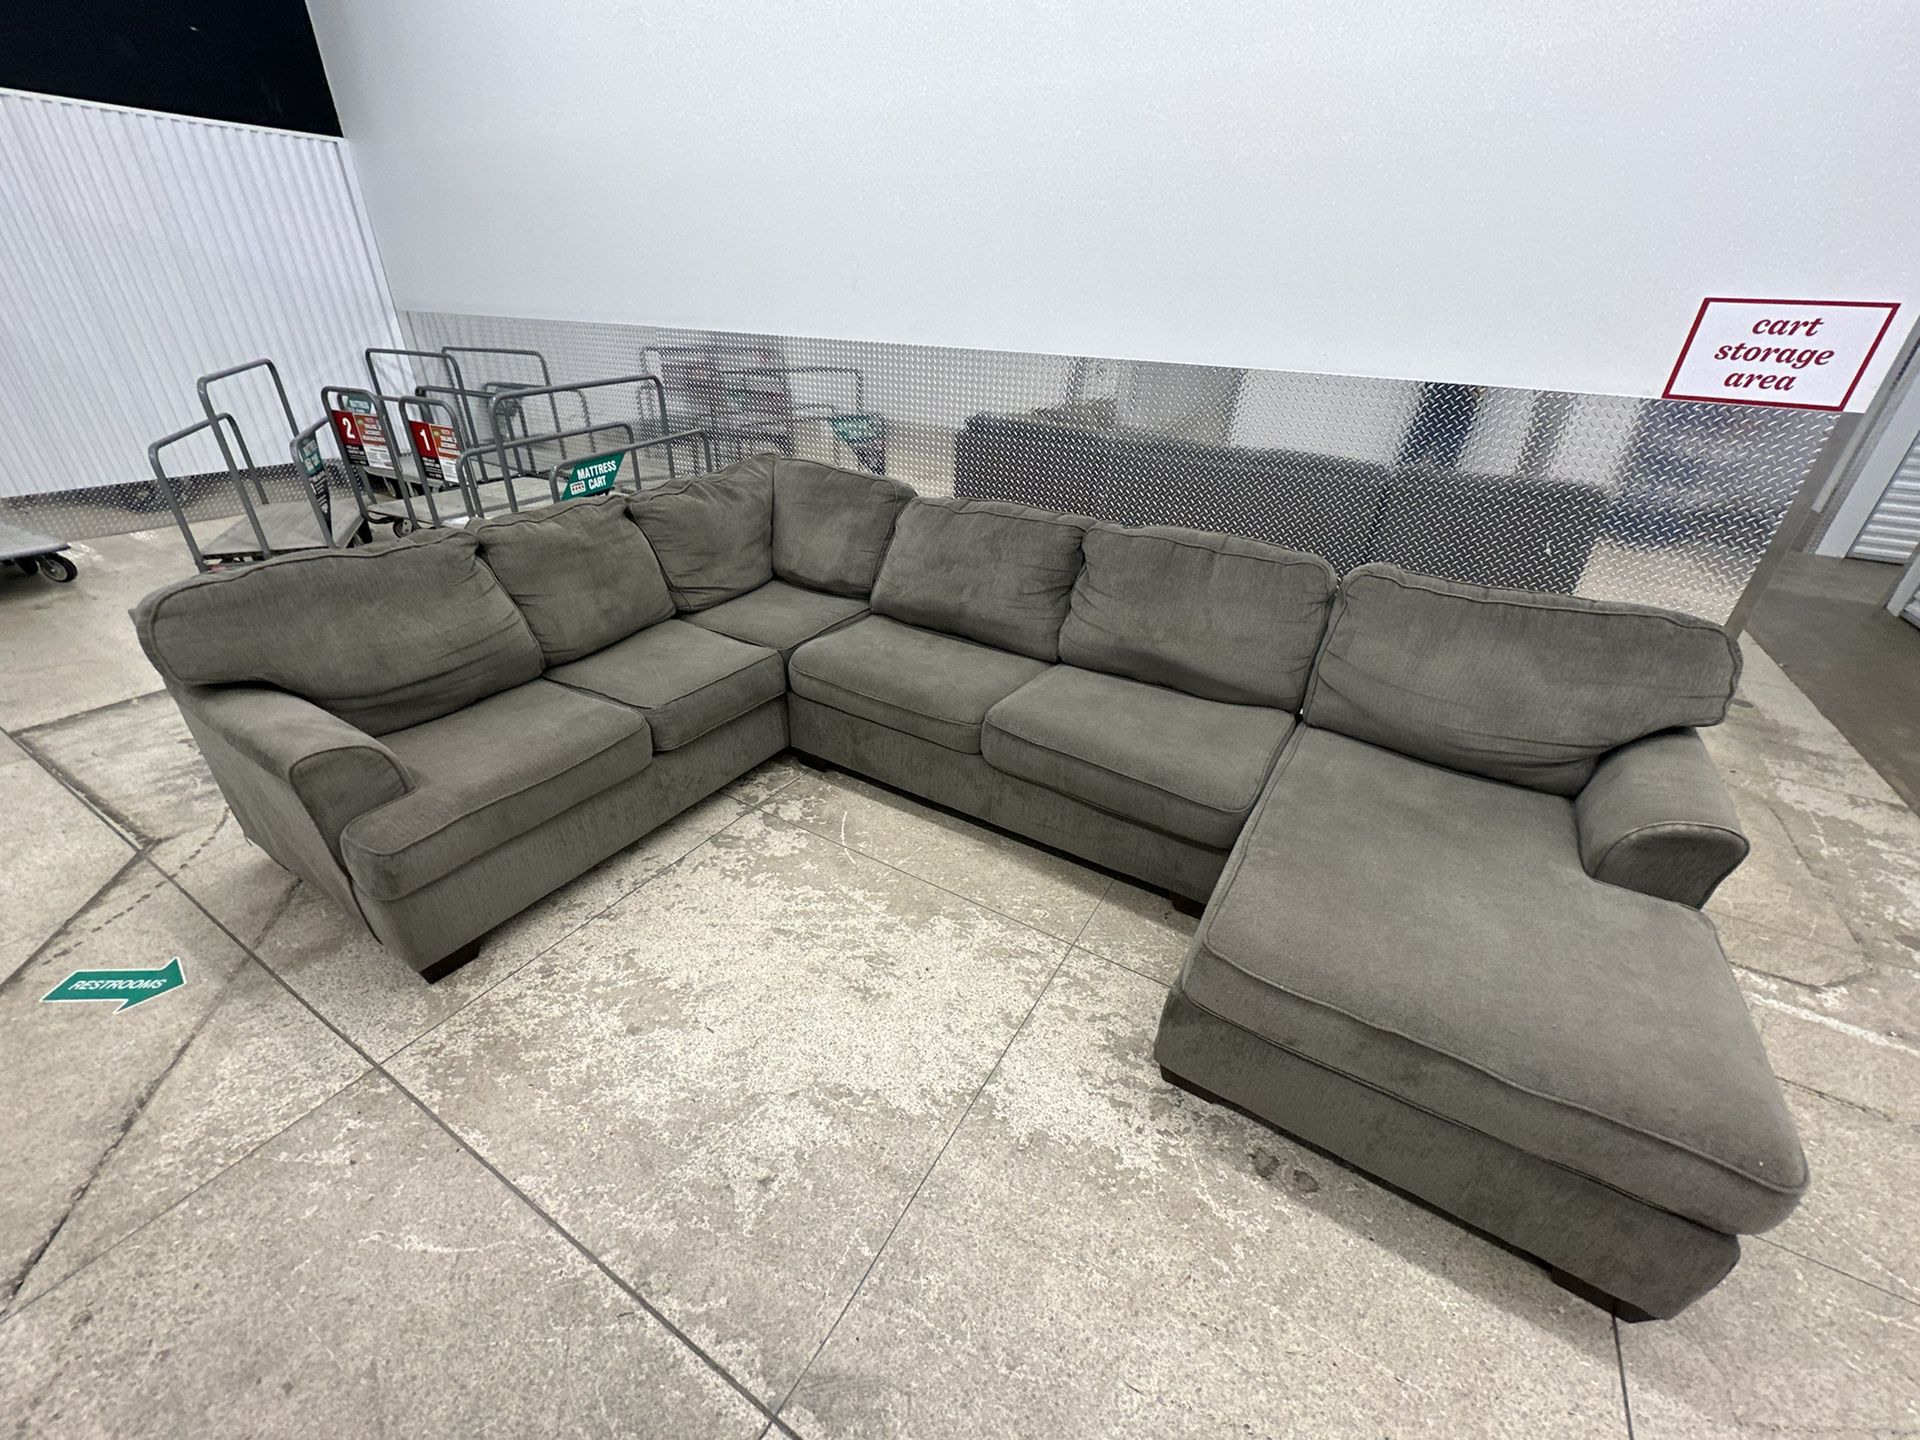 (FREE DELIVERY) Gray Sectional